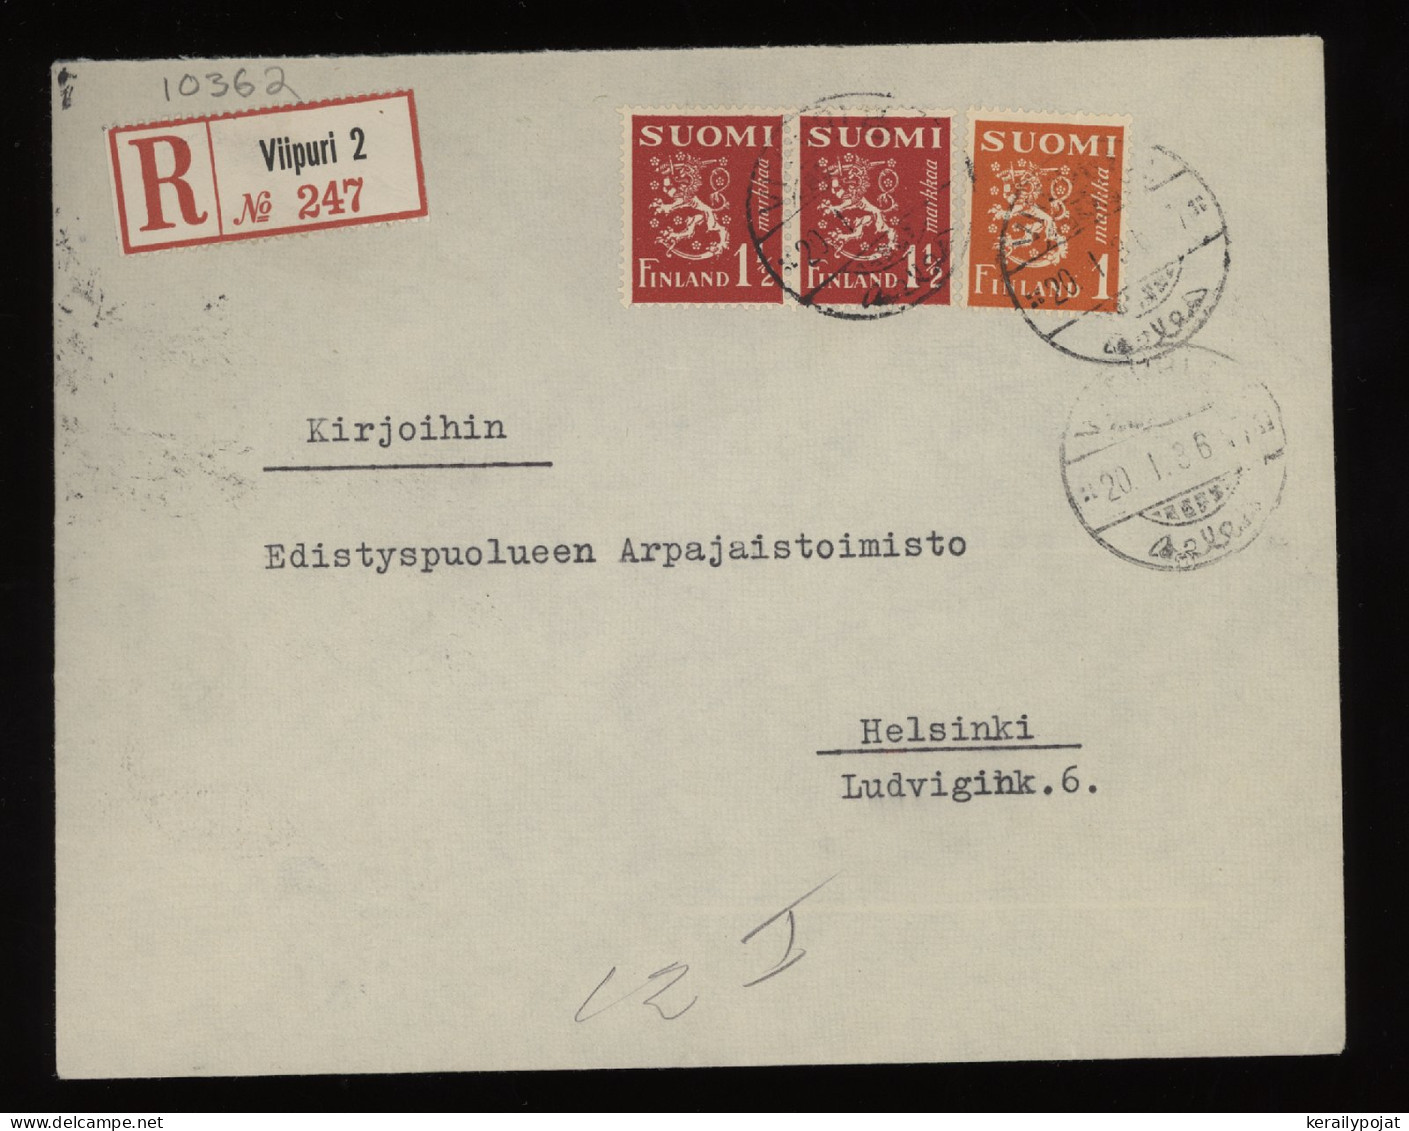 Finland 1936 Viipuri 2 Registered Cover__(10362) - Covers & Documents